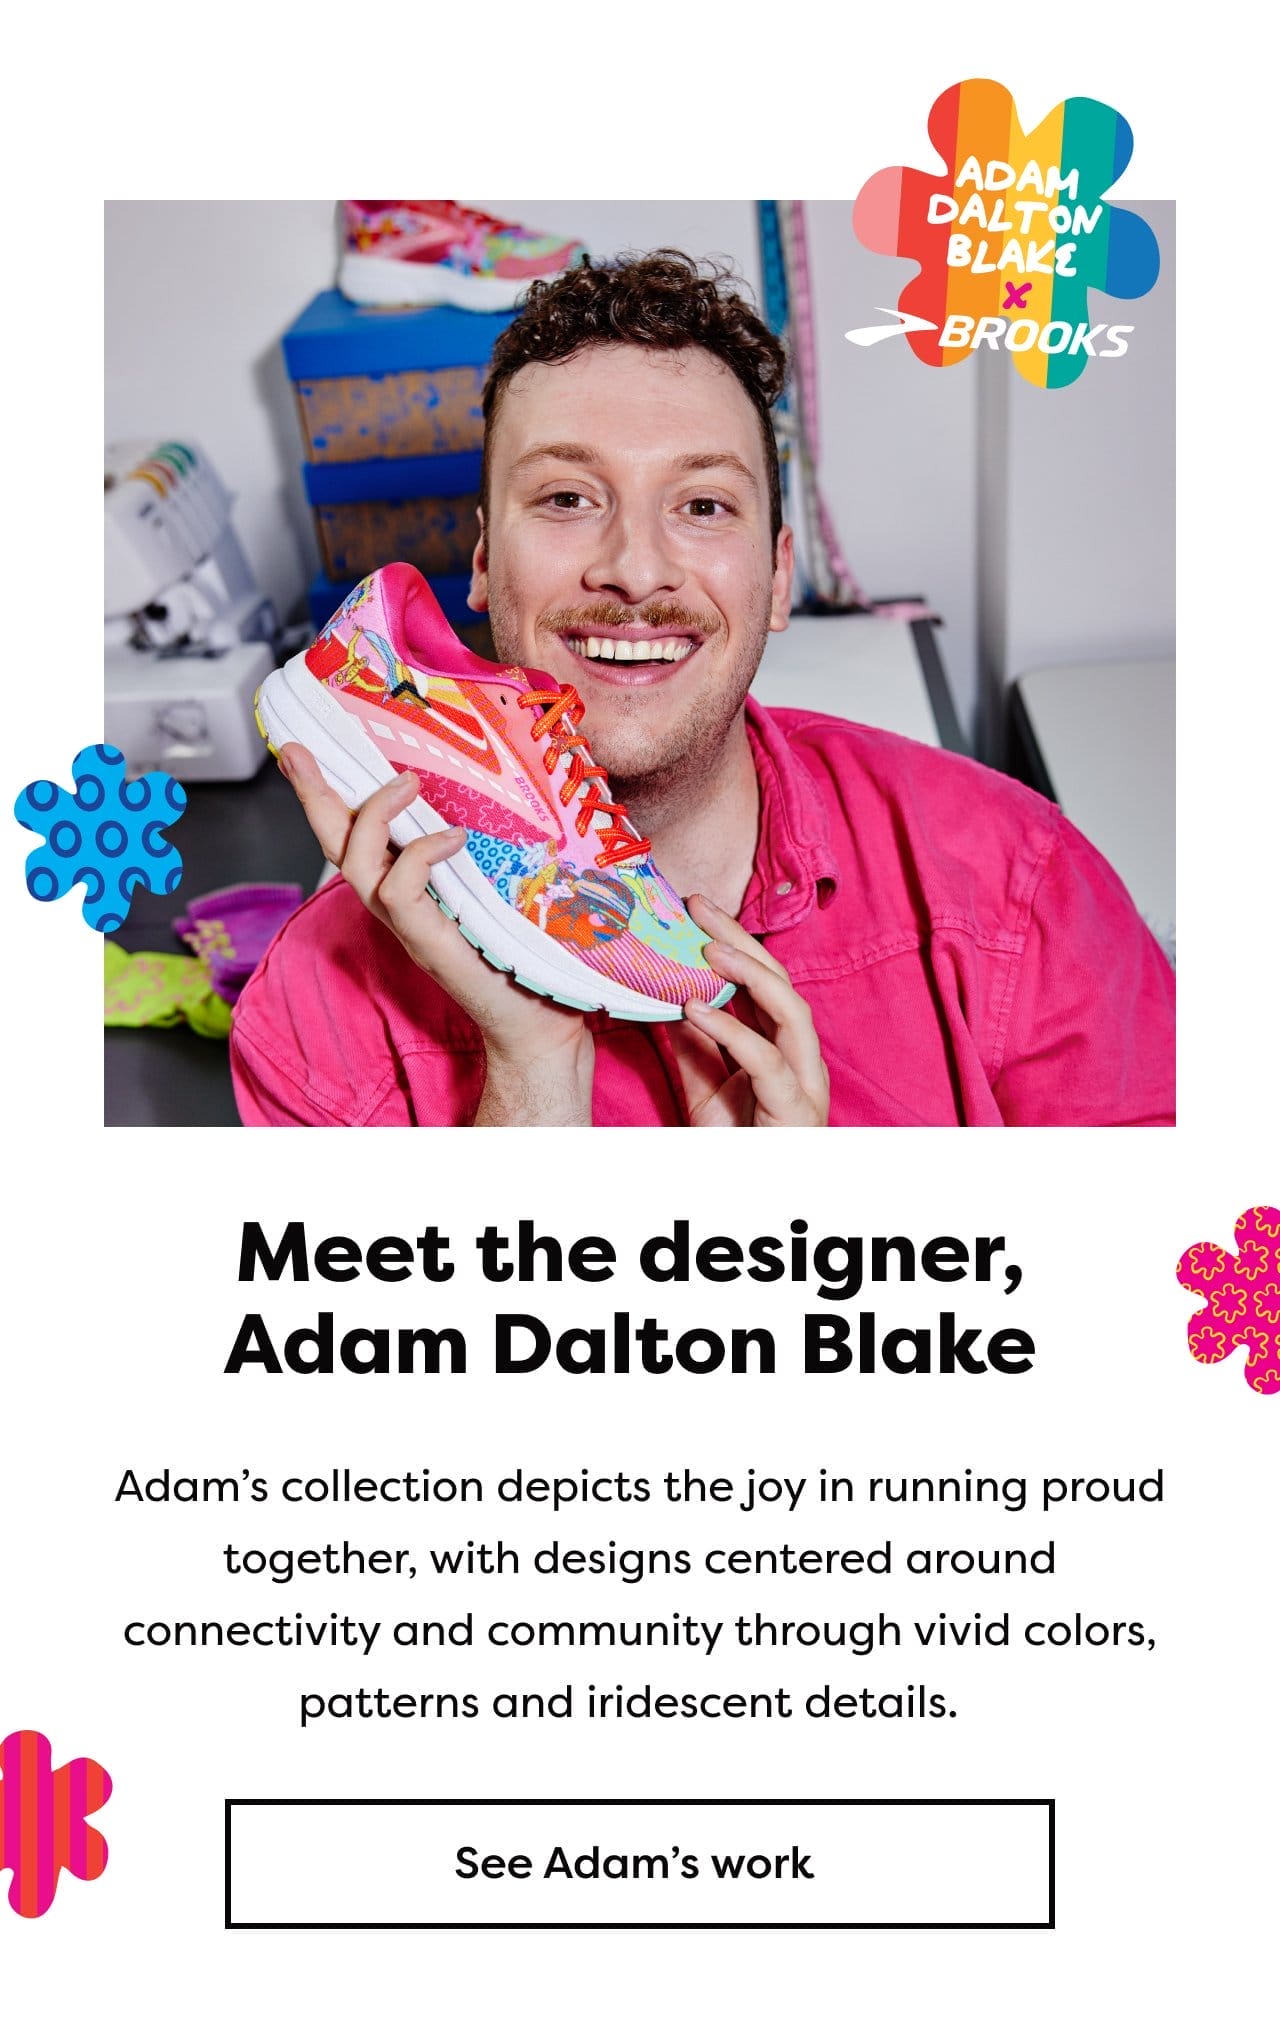 Meet the designer, Adam Dalton Blake | Adam's collection depicts the joy in running proud together, with designs centered around connectivity and community through vivid colors, patterns and iridescent details. See Adam's work